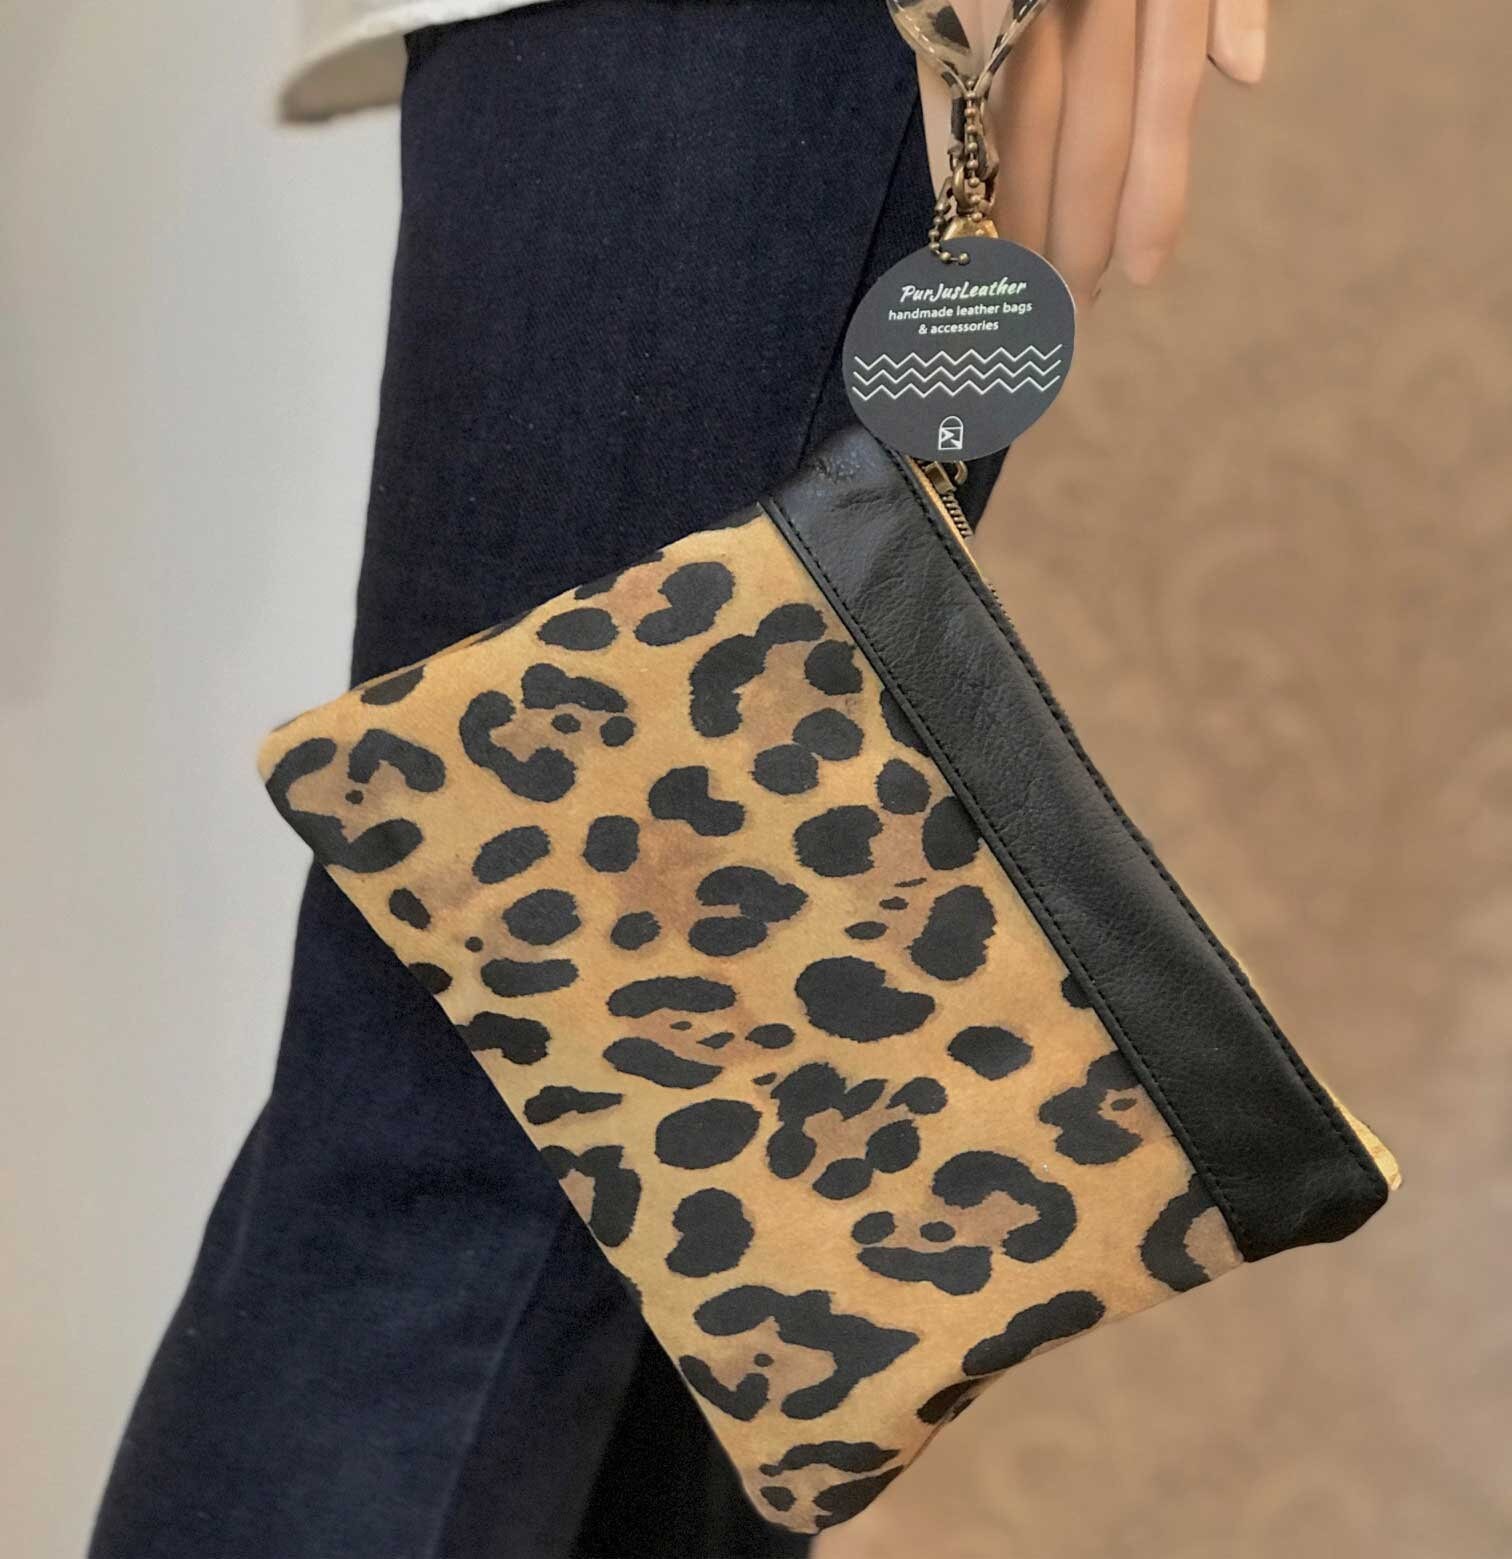 Prism Large Animal-Print Calf Hair and Leather Satchel